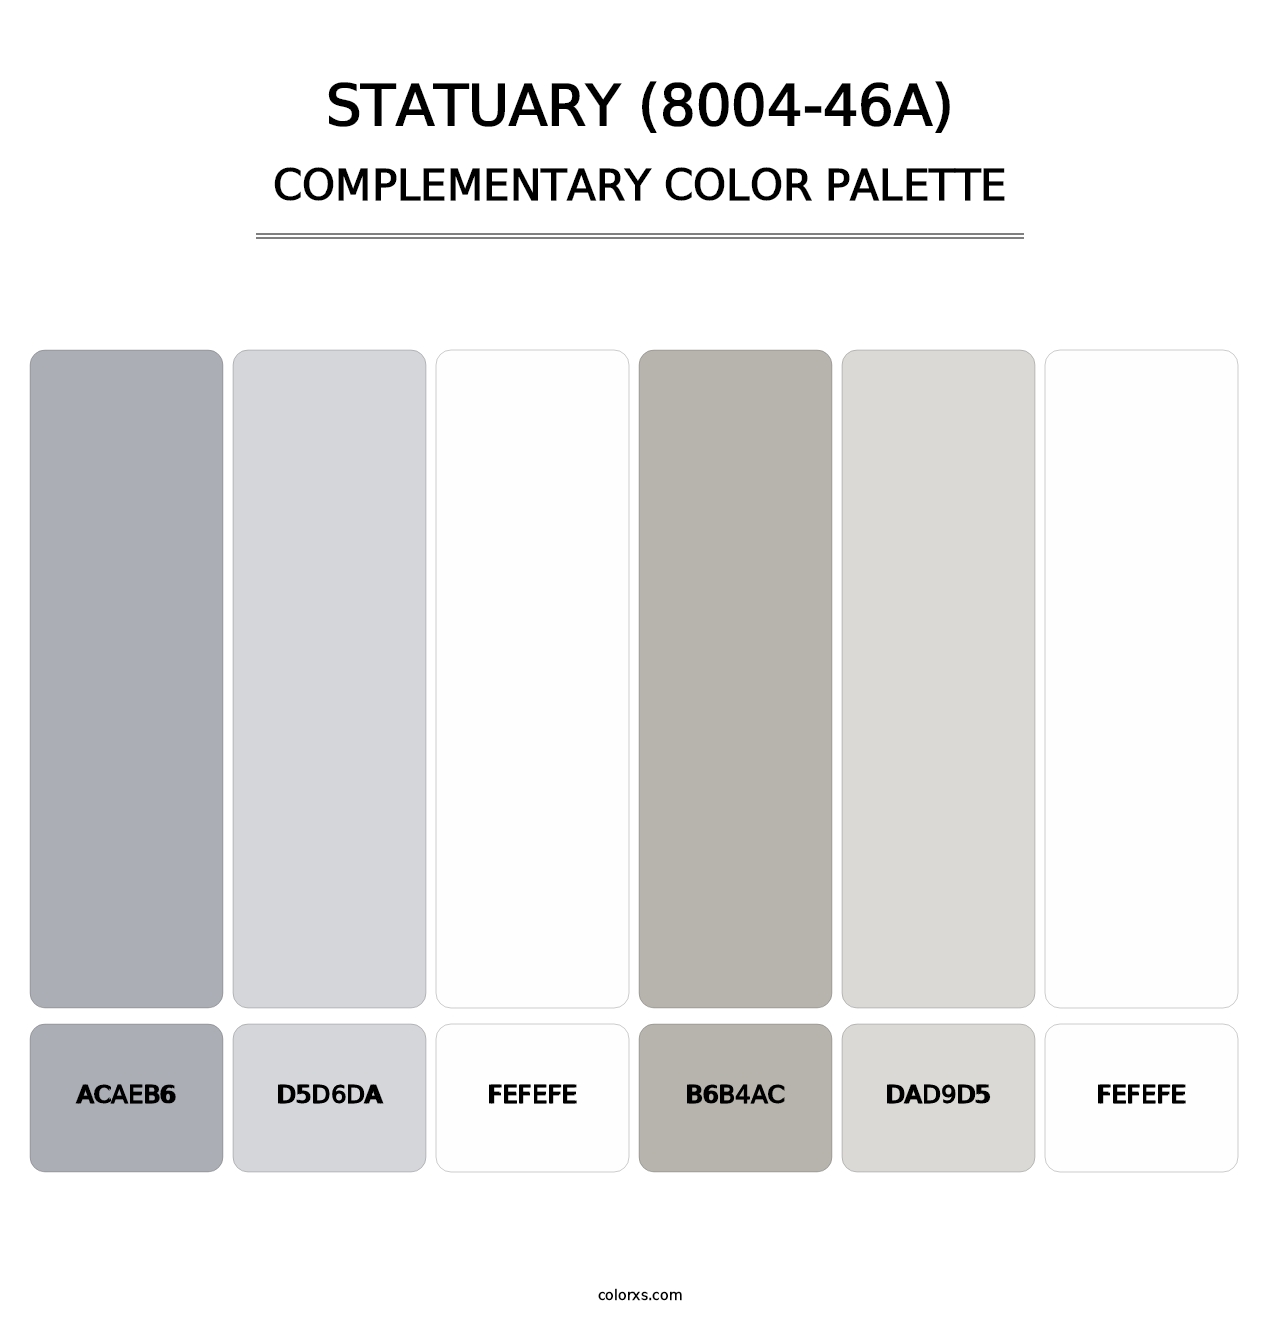 Statuary (8004-46A) - Complementary Color Palette